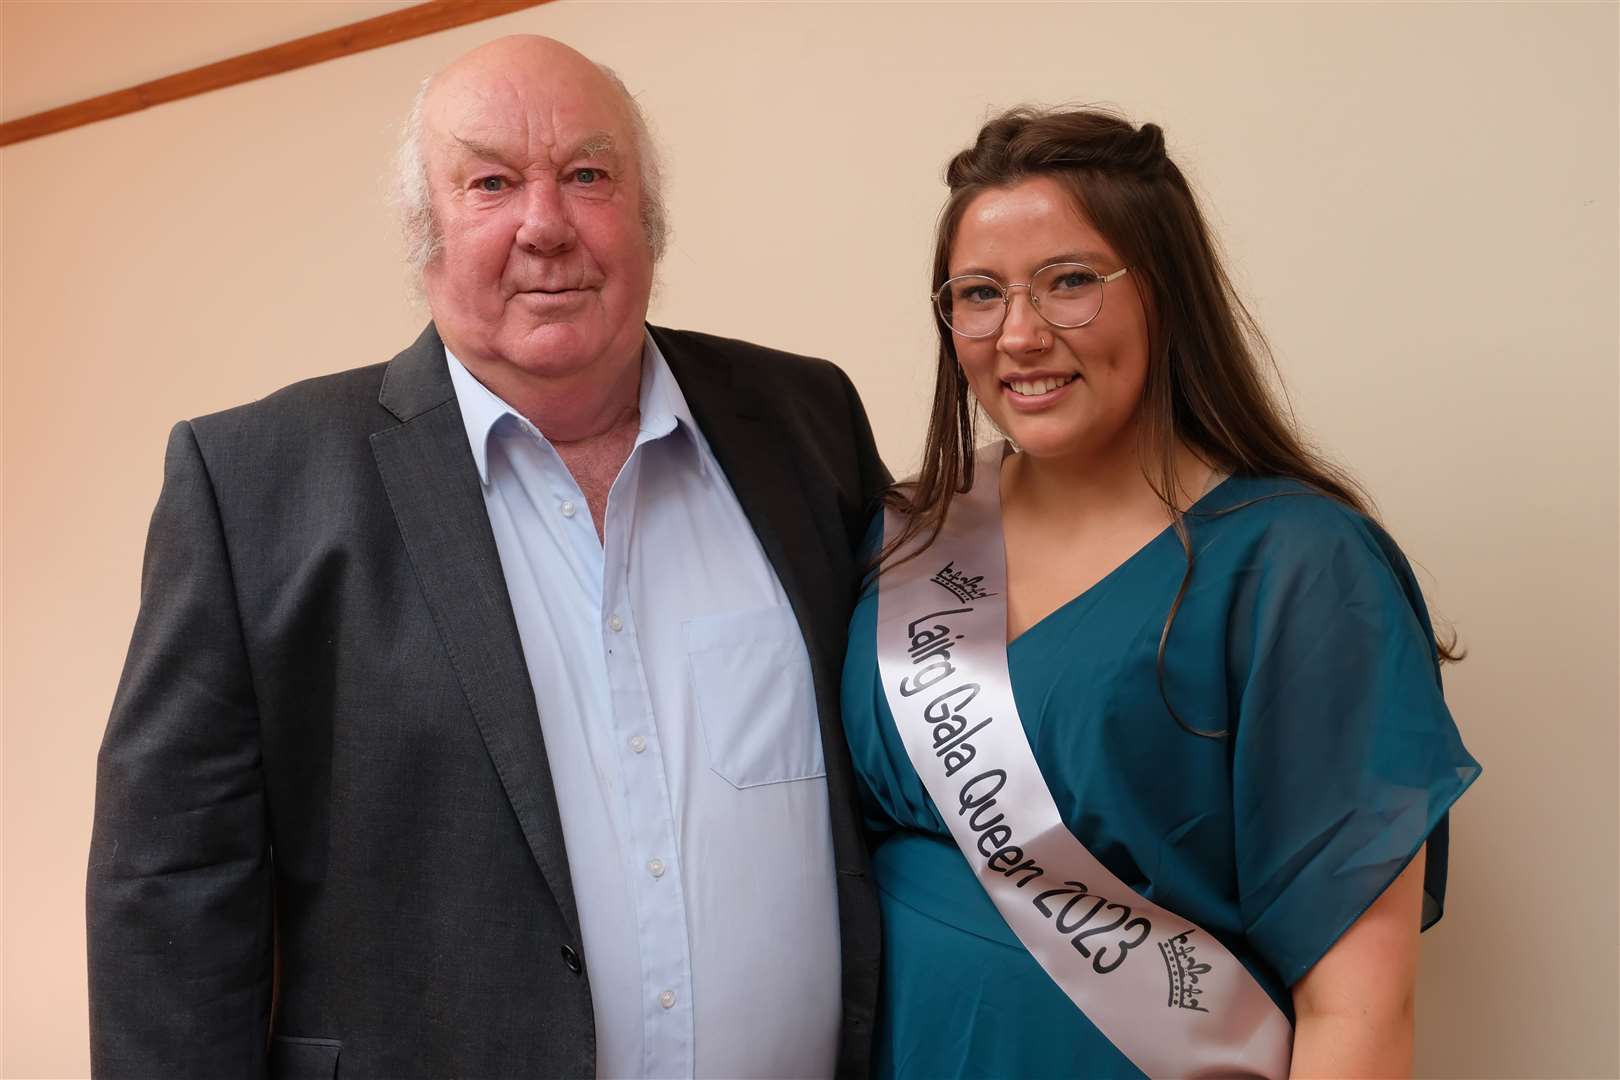 One for the family album. Gala Queen Emma Macrae with her grandfather Donnie Macrae.